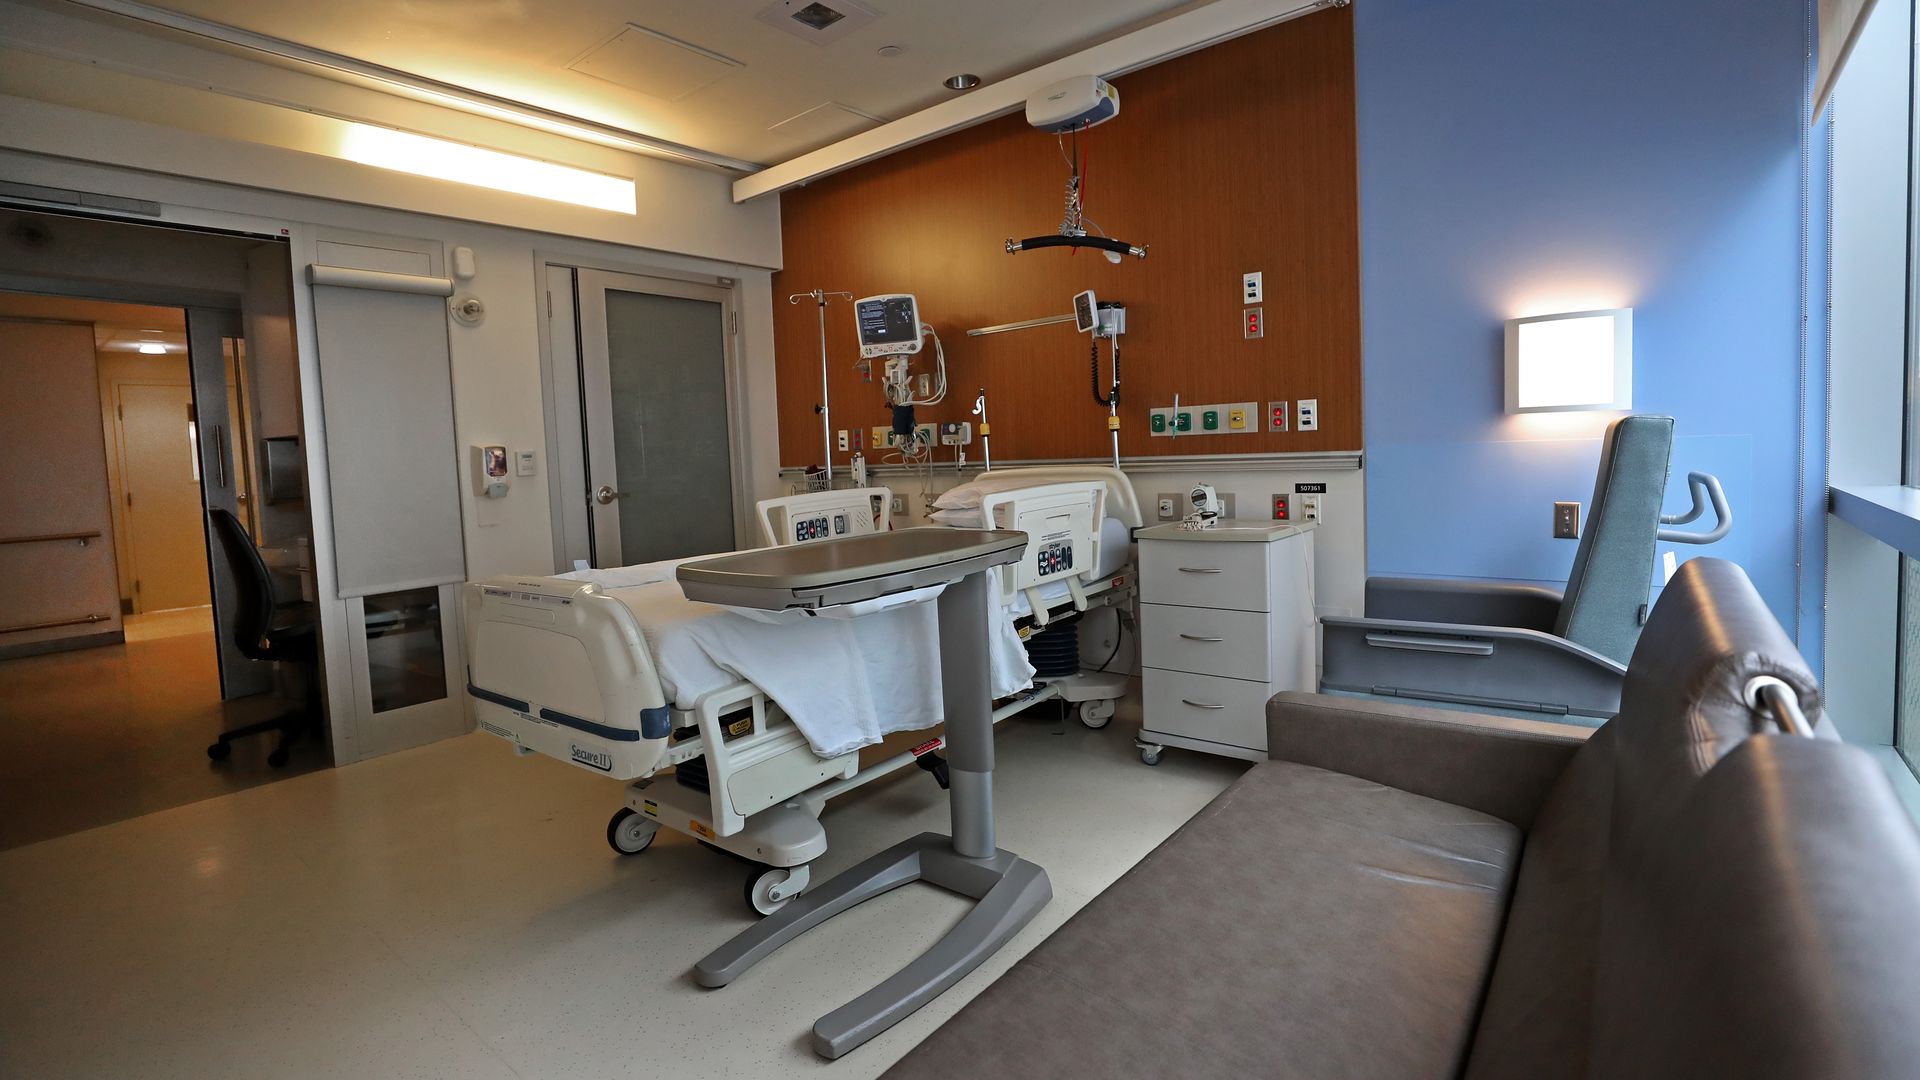 A hospital bed and equipment in an empty patient room.